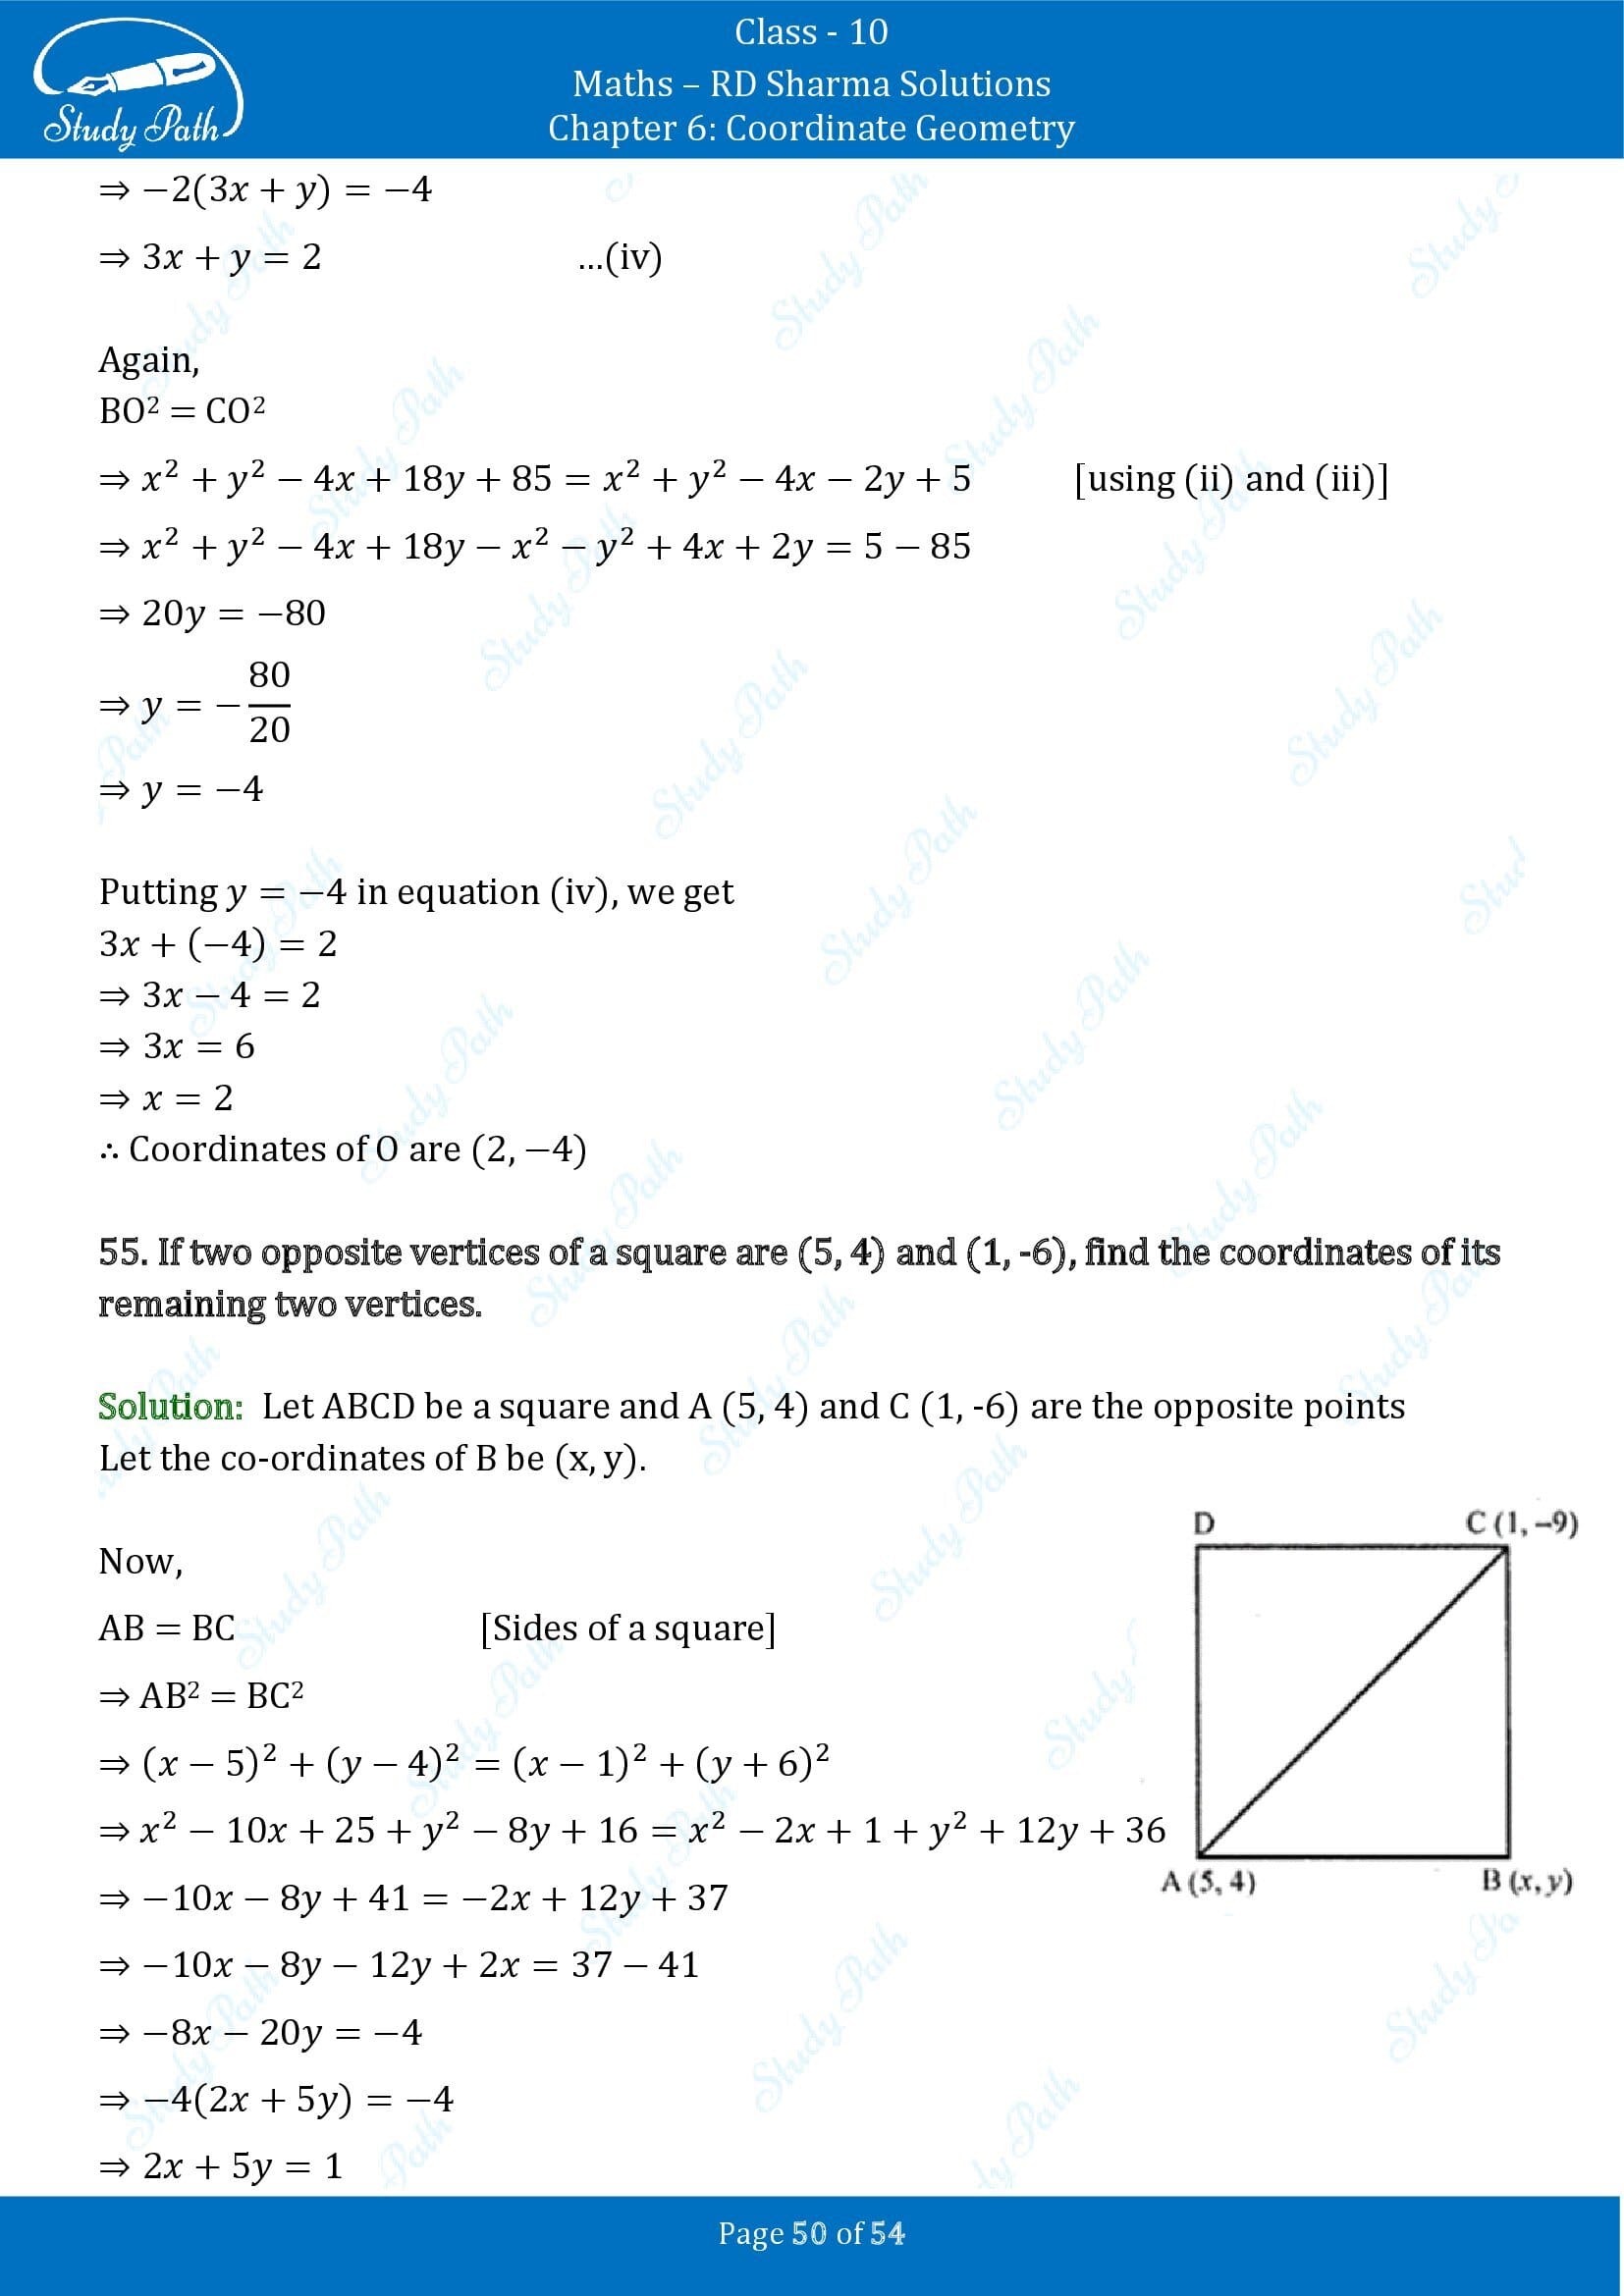 RD Sharma Solutions Class 10 Chapter 6 Coordinate Geometry Exercise 6.2 0050